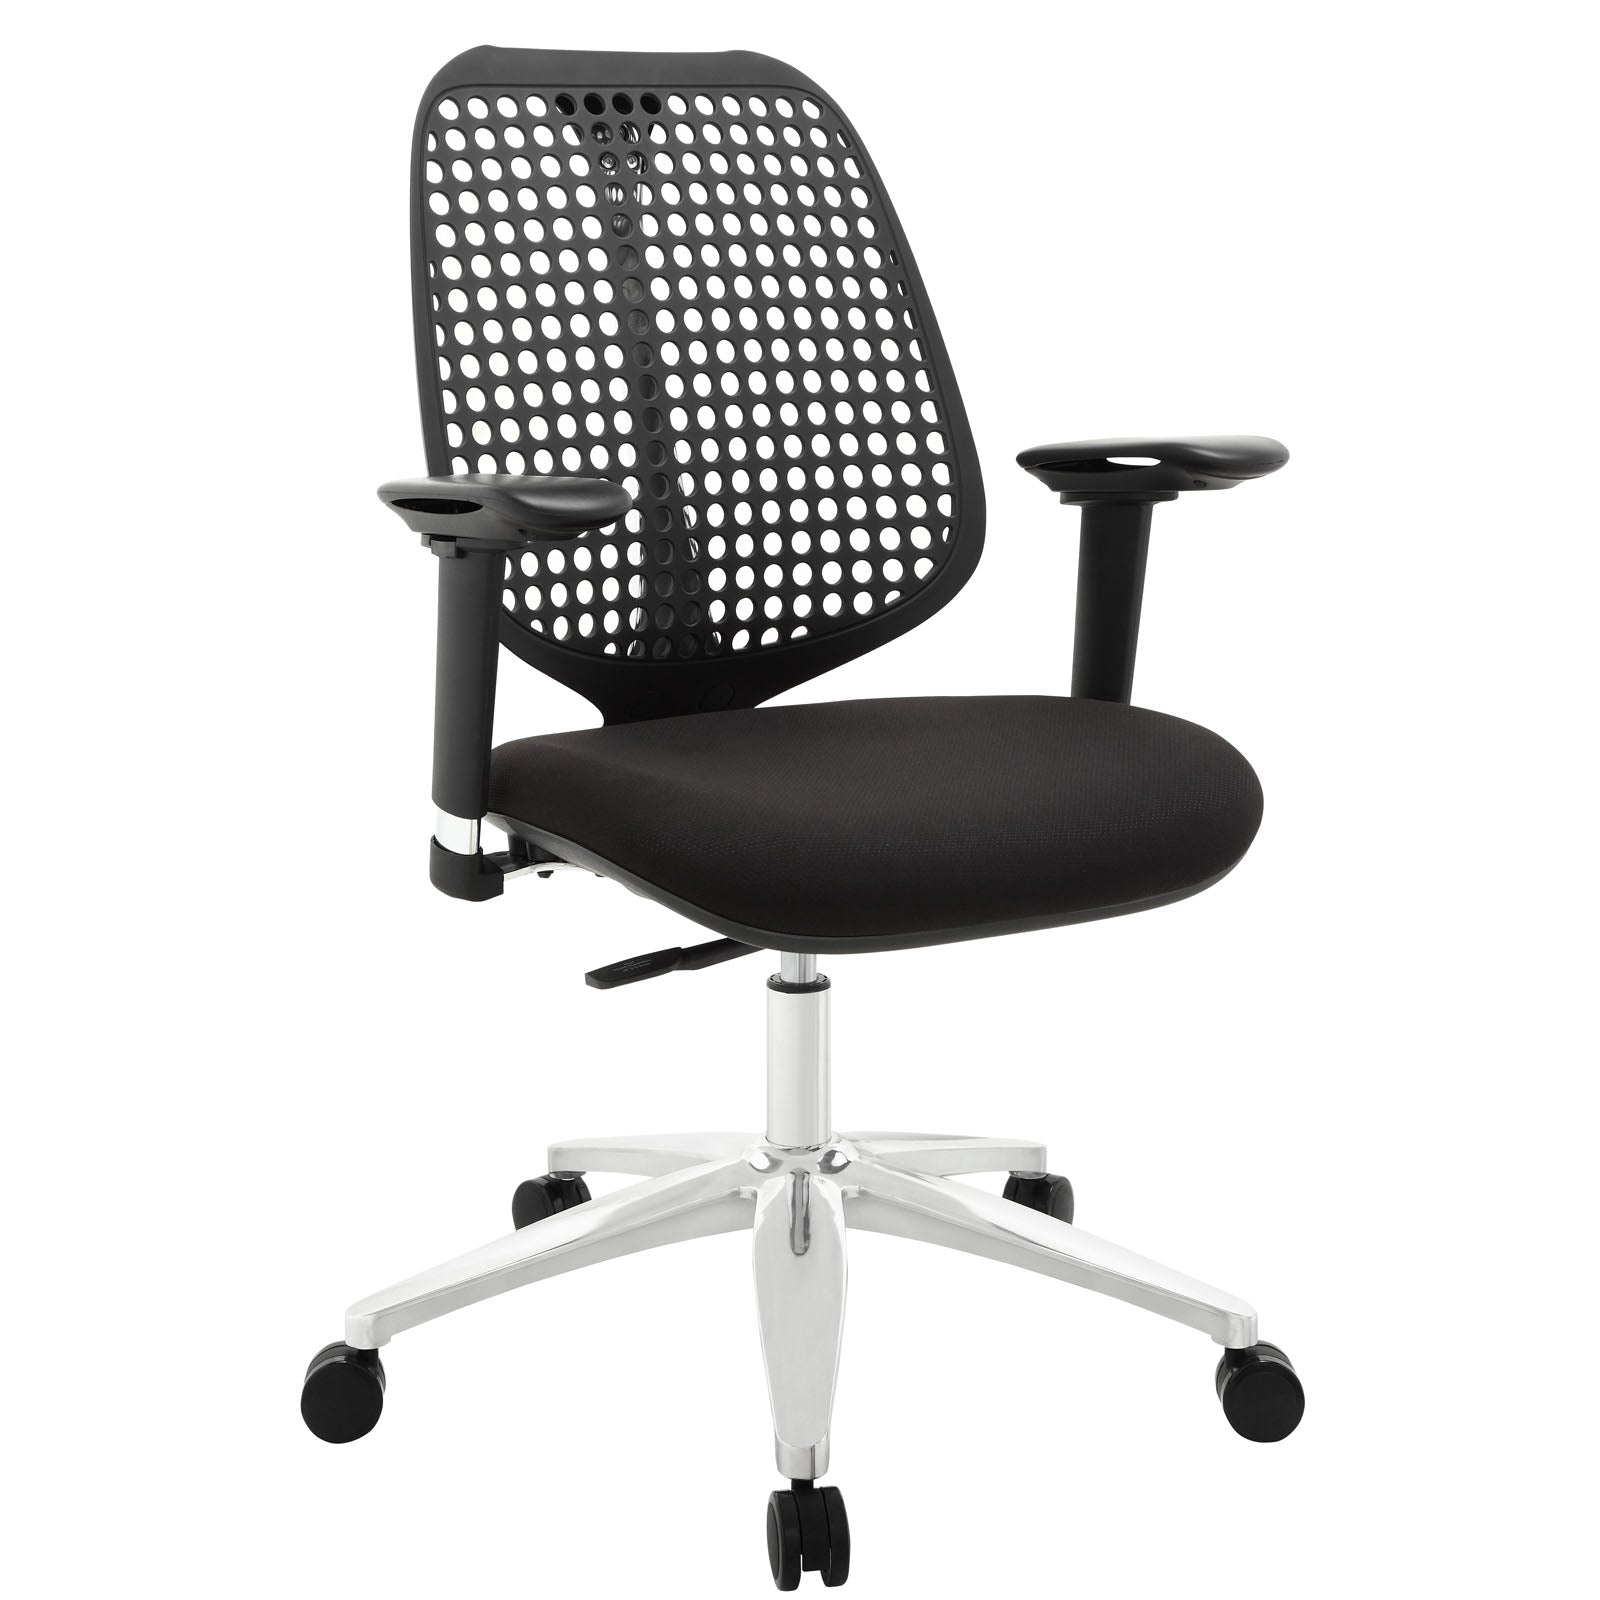 Buy Reverb Premium Office Chair for Extra Comfort at Workplace